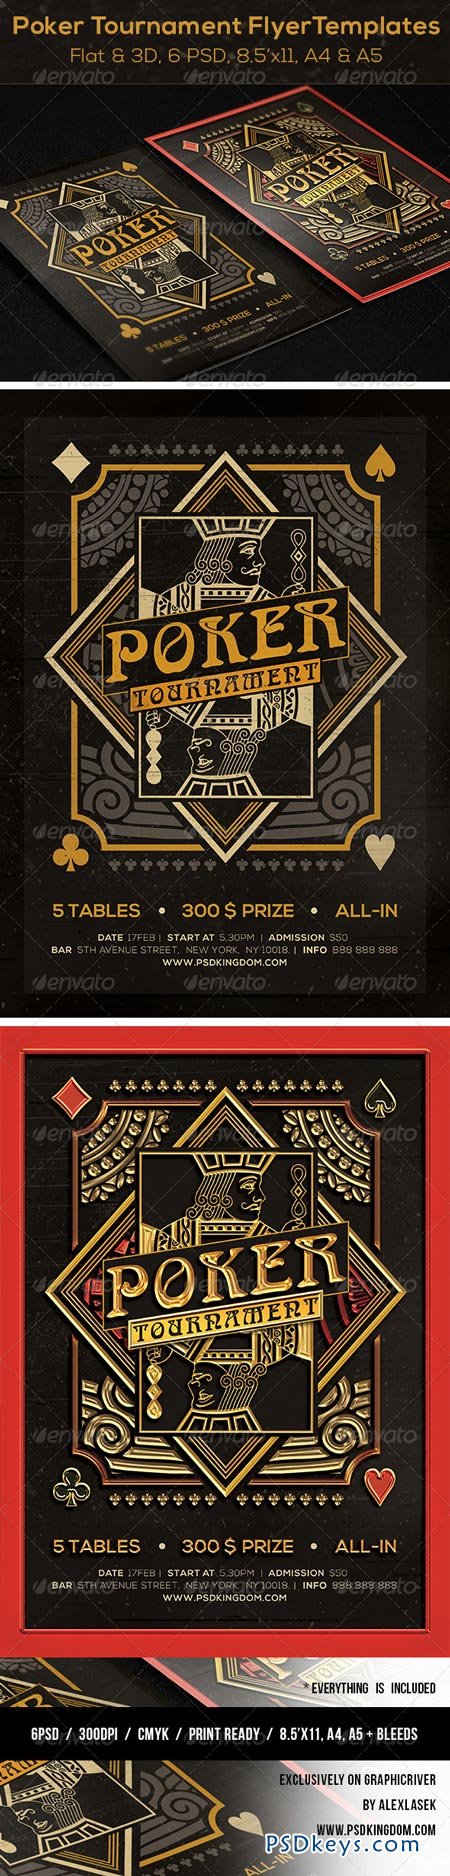 Poker Magazine Ad, Poster or Flyer  Flat & 3D 6238434